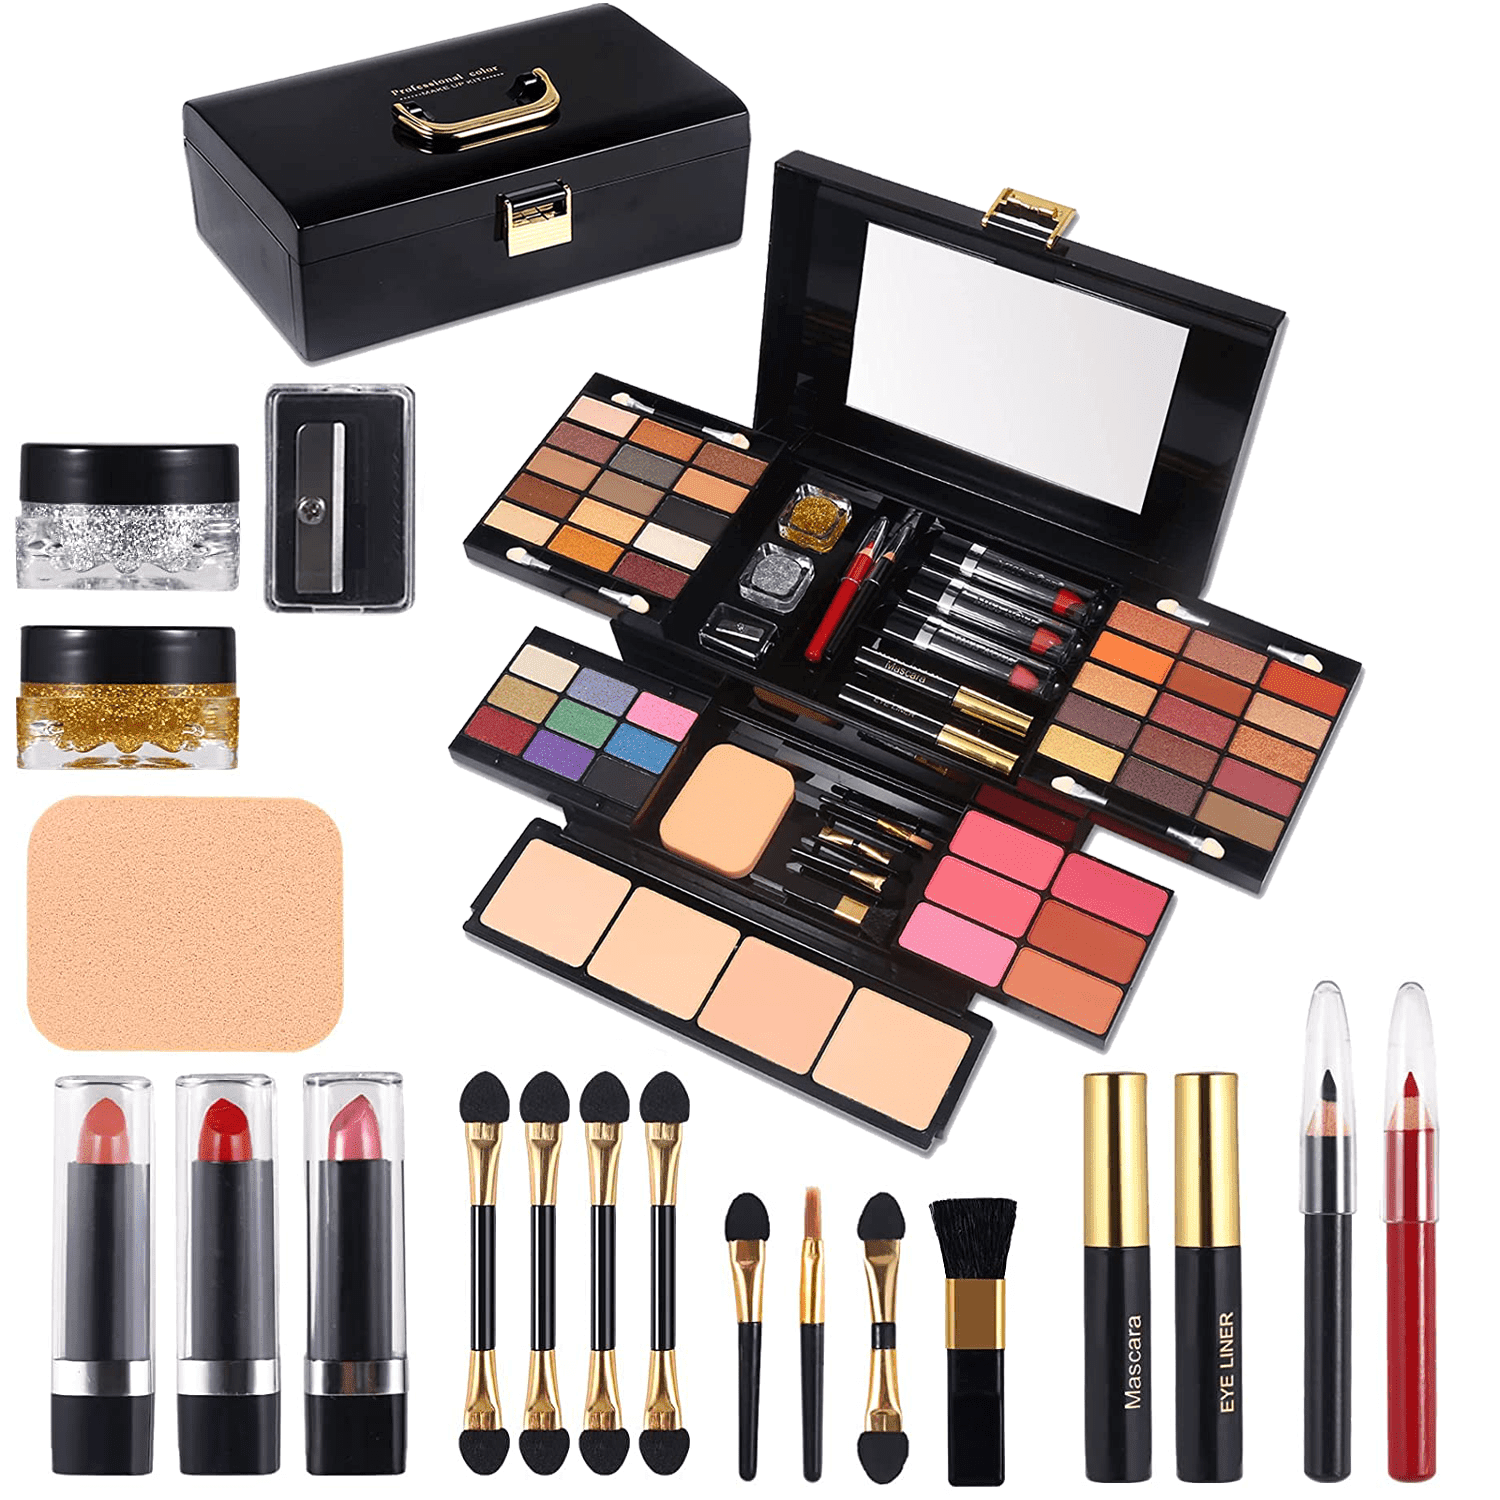 58 Colors Professional Makeup Kit for Women Full Kit,All in One Makeup for Women Girls Gift Set with Eye Shadow Blush,Lipstick,Compact Powder,Mascara,Eyeliner,Eyebrow Pencil…… - Walmart.com